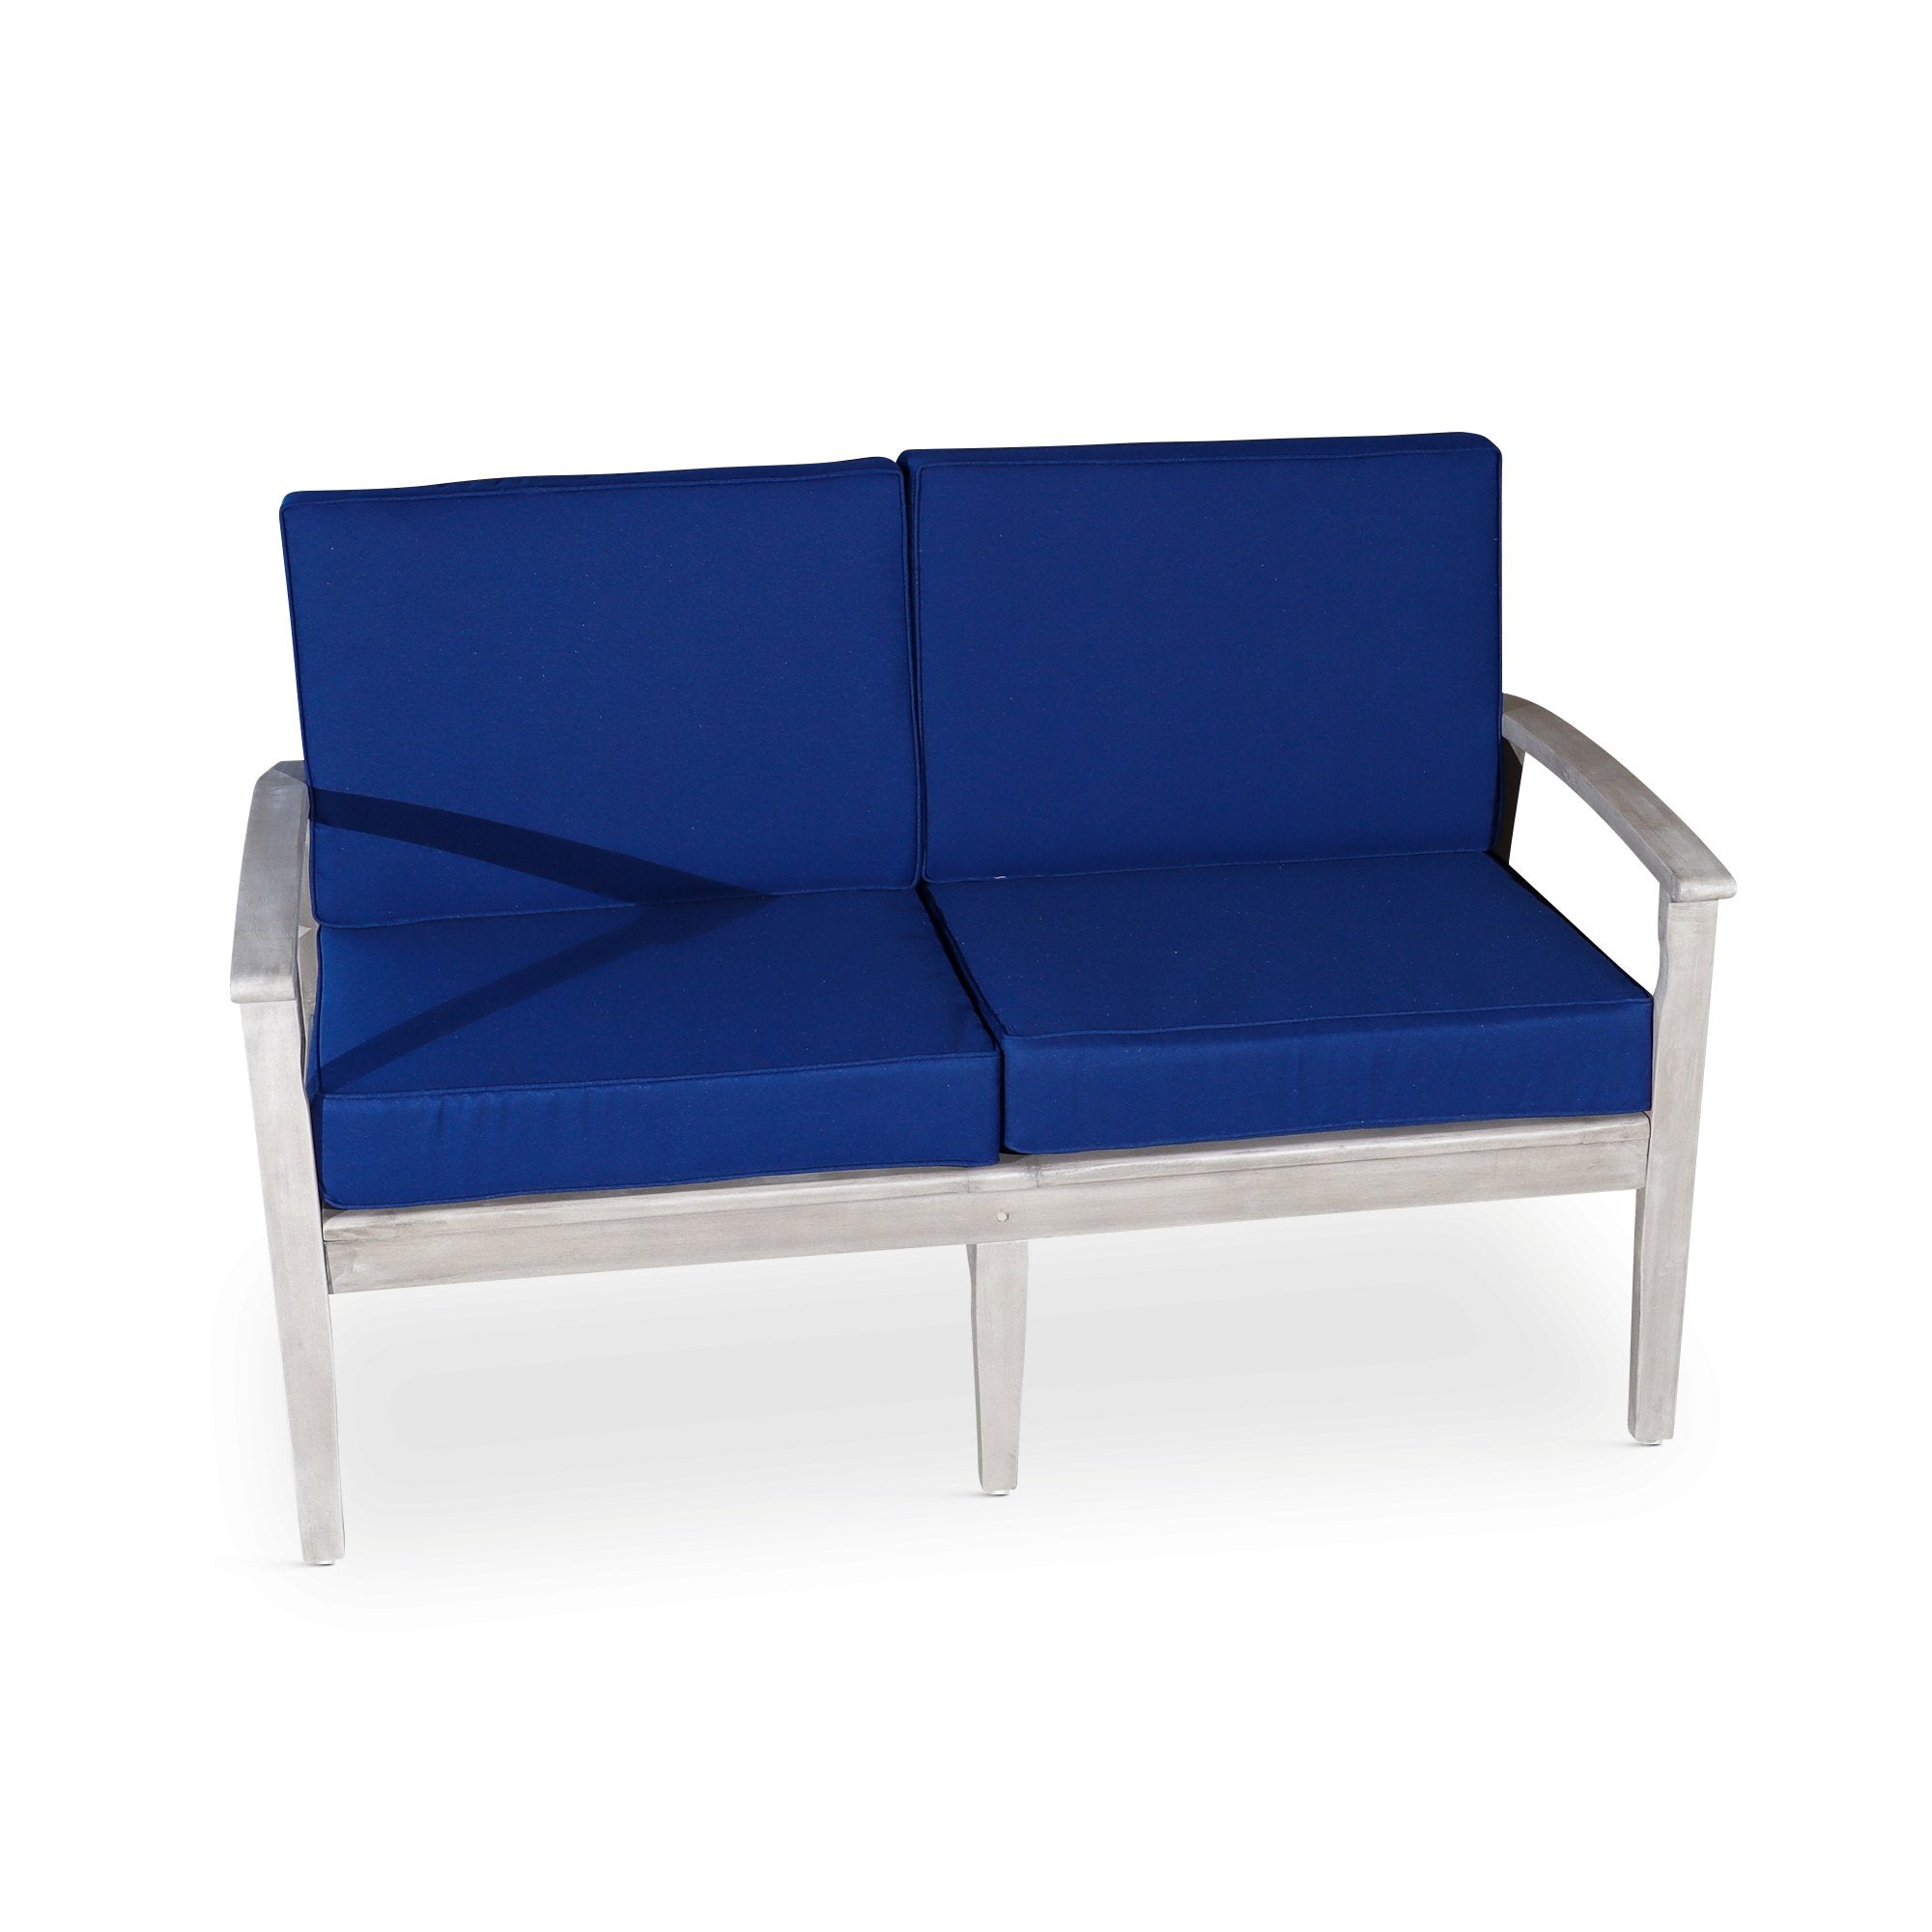 Outdoor Loveseat with Cushions, Silver Gray Finish, Navy Cushions - Tuesday Morning-Chairs & Seating